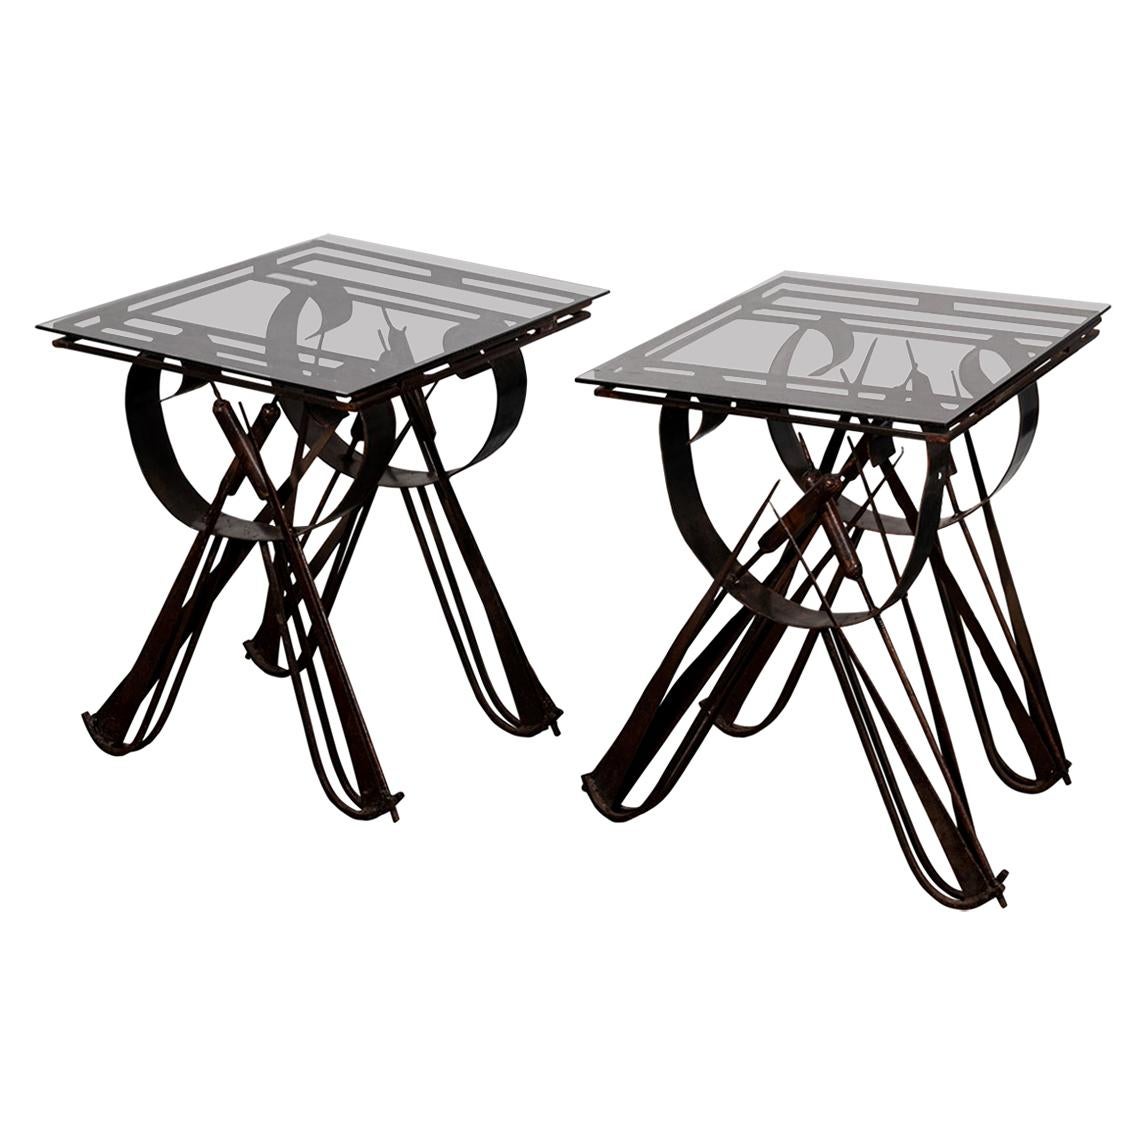 Pair of Cat Tail Iron Side Tables with Black Glass Tops